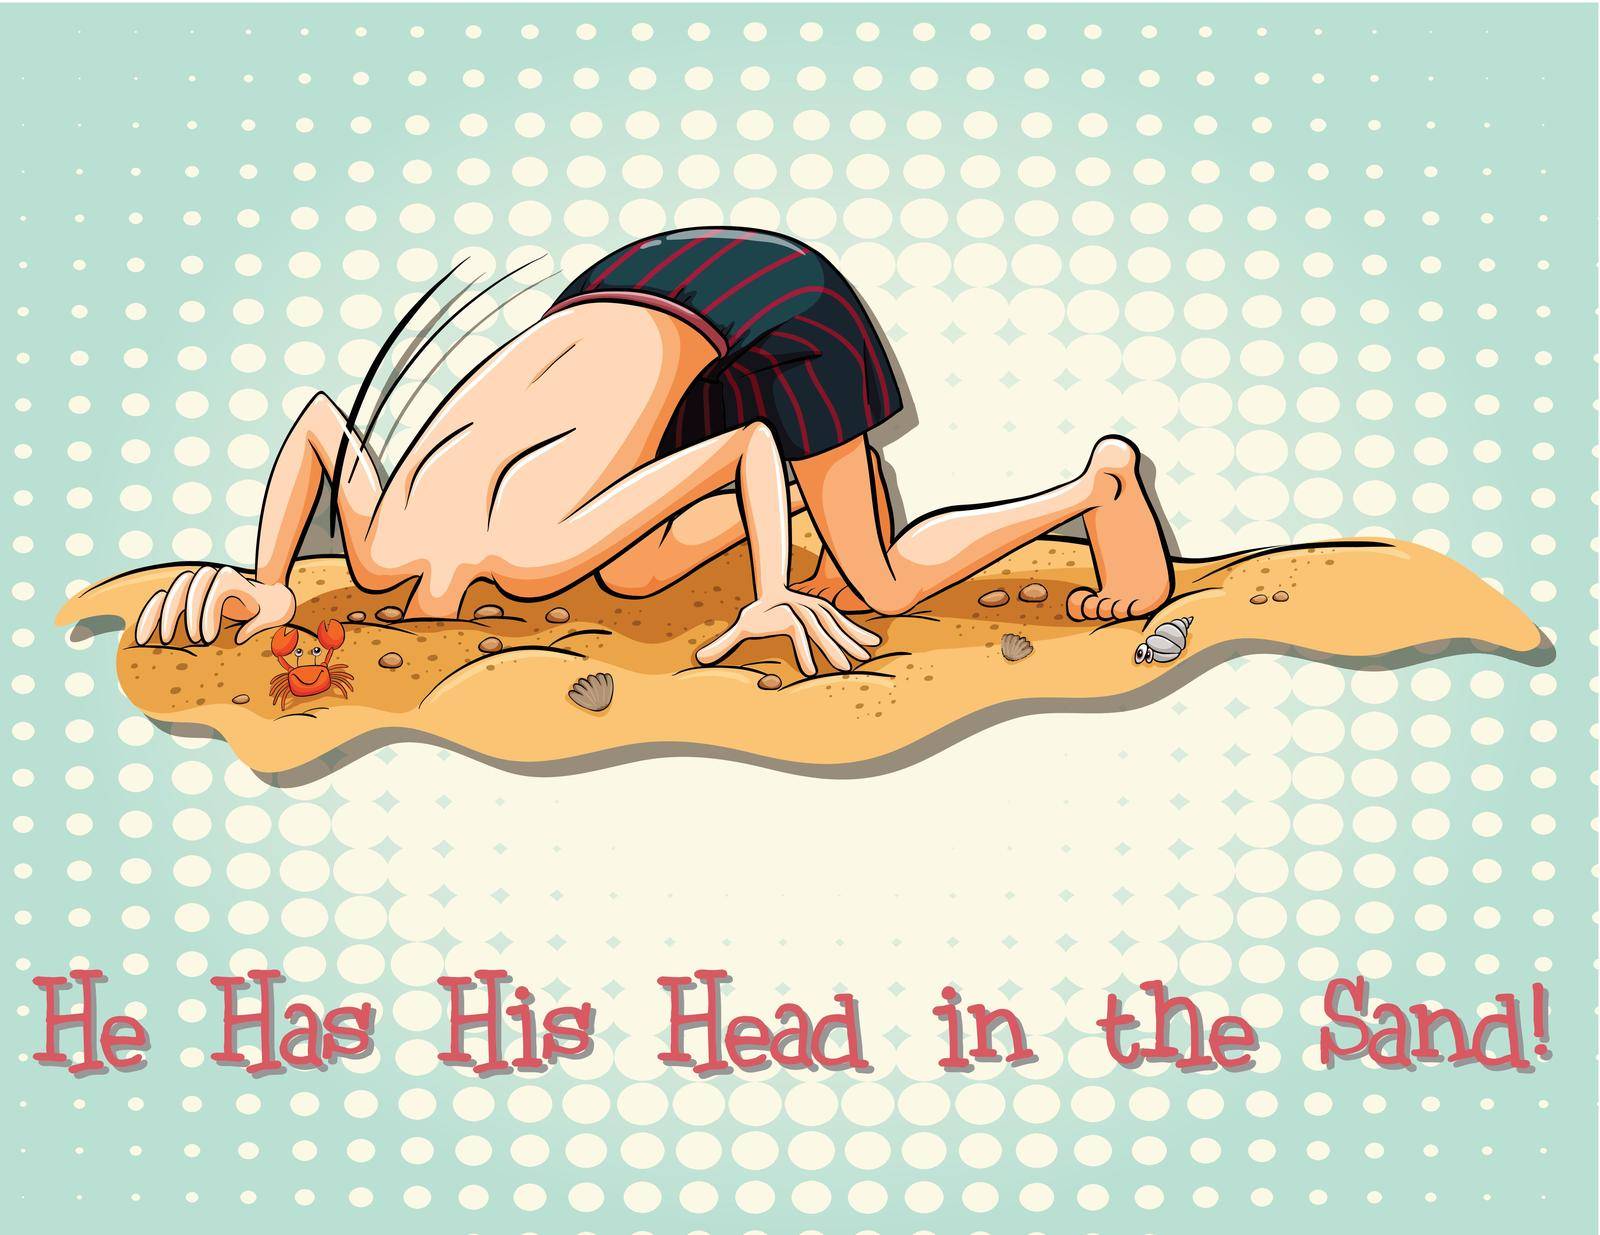 He has his head in the sand by iimages